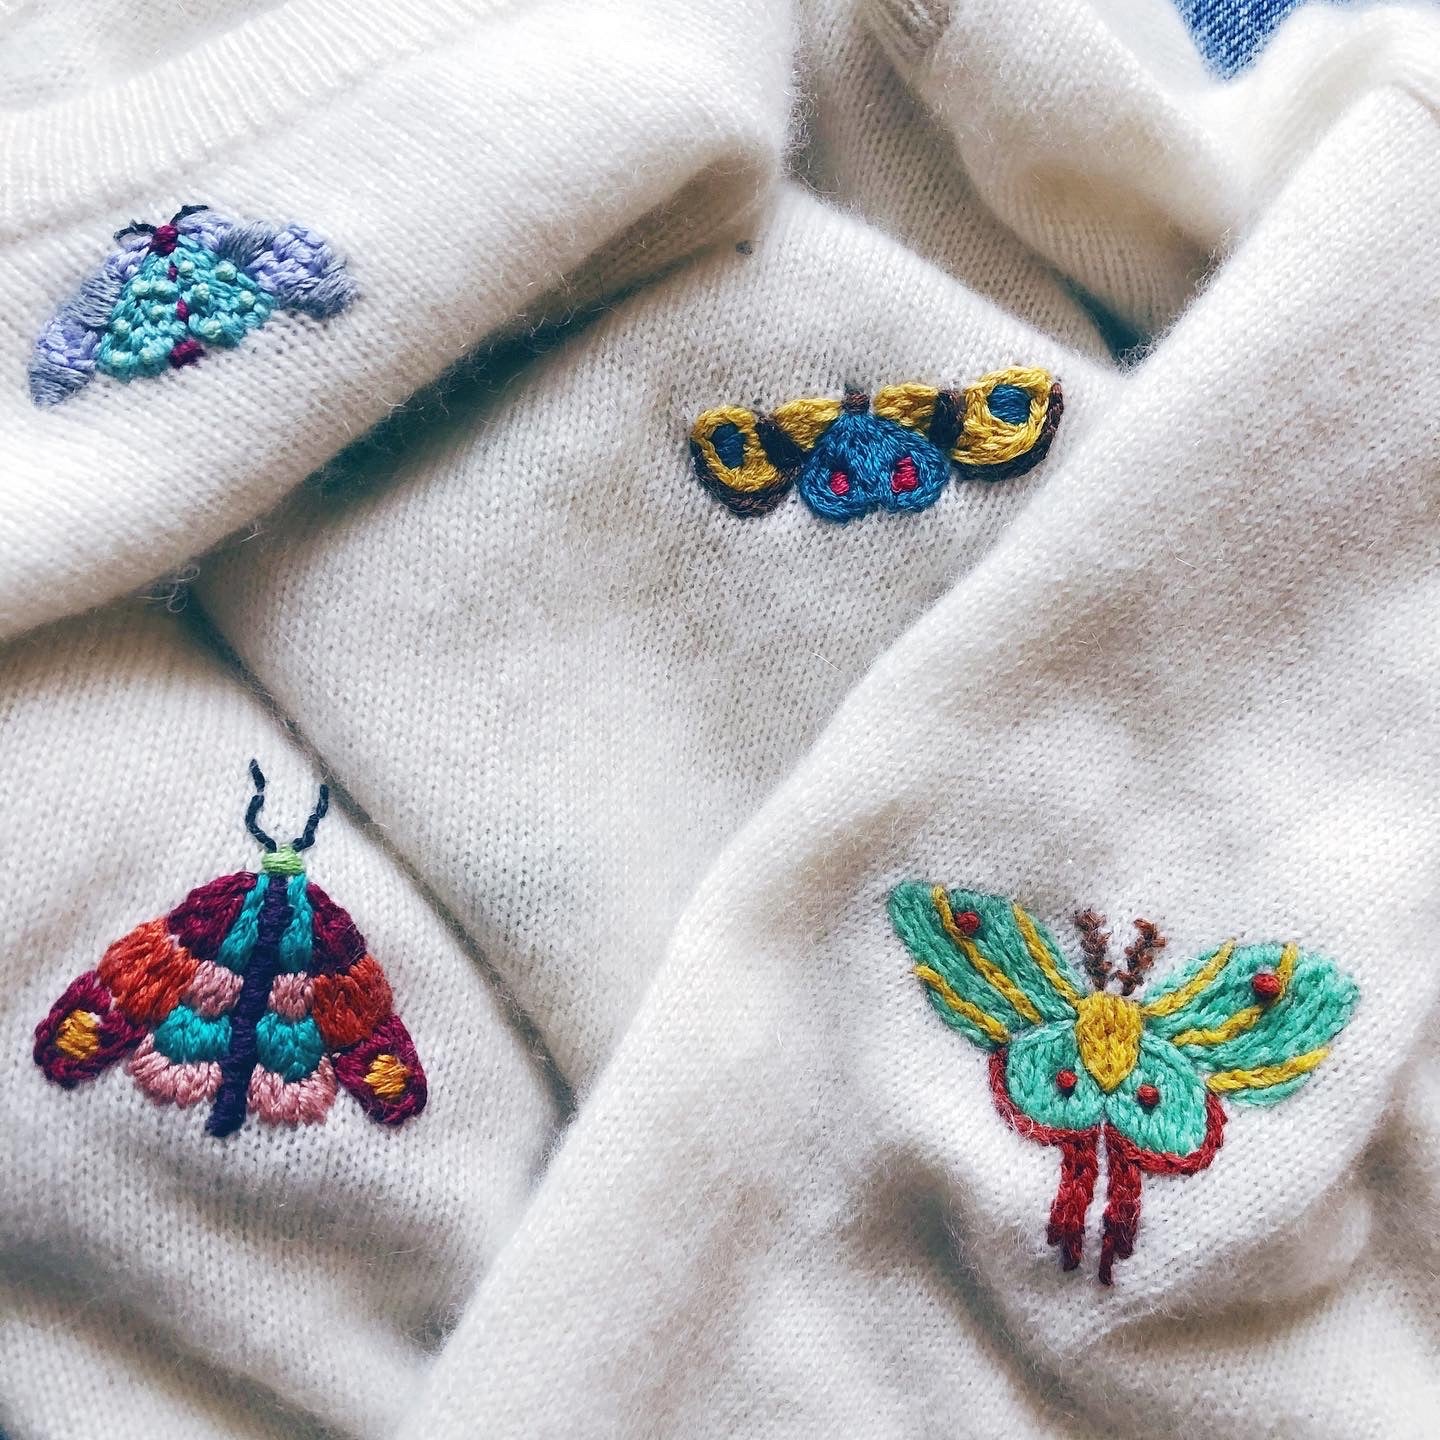 DIY Moth Mending Embroidery Stick-On Wash Off Transfers